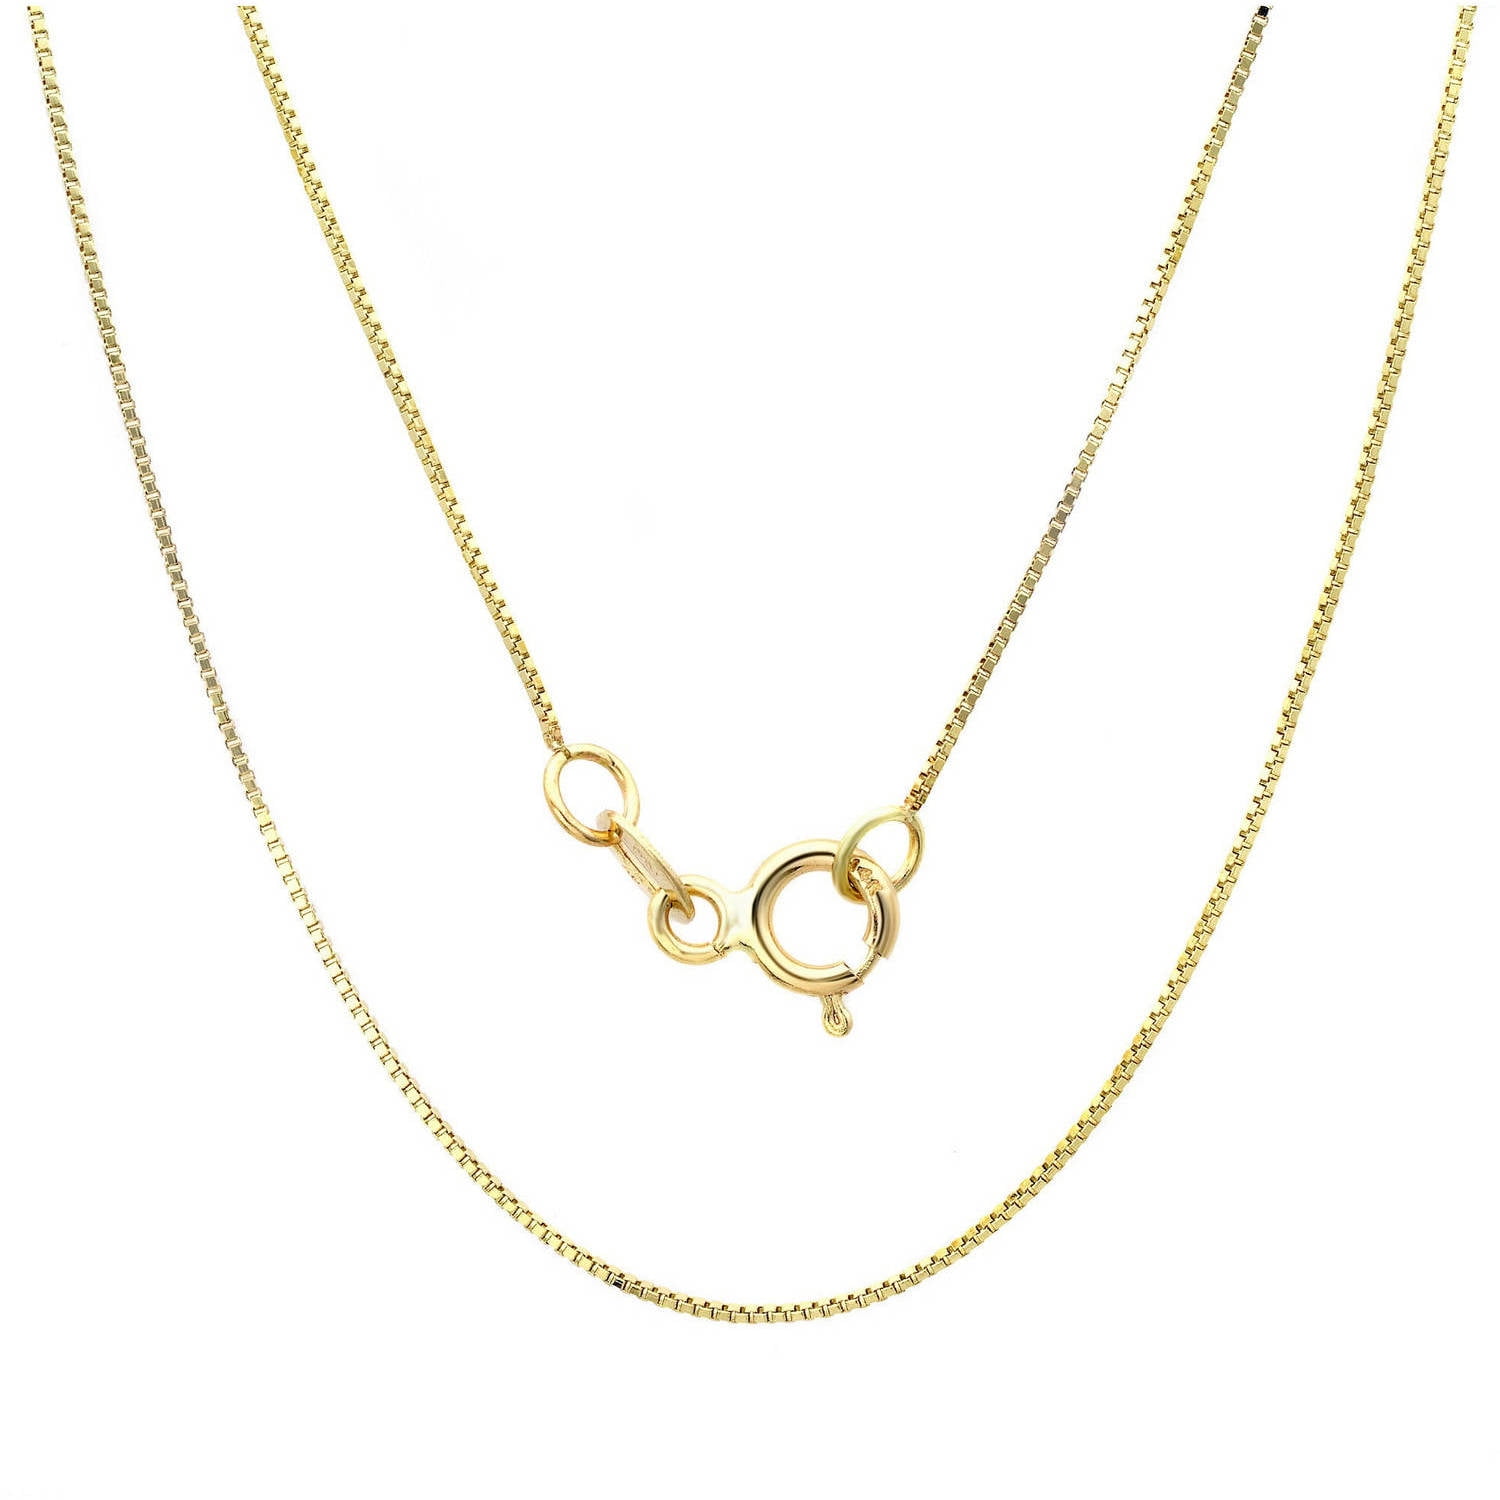 10k Yellow Gold Classic Box Chain 0.45mm Necklace Womens Mens Unisex Jewelry 